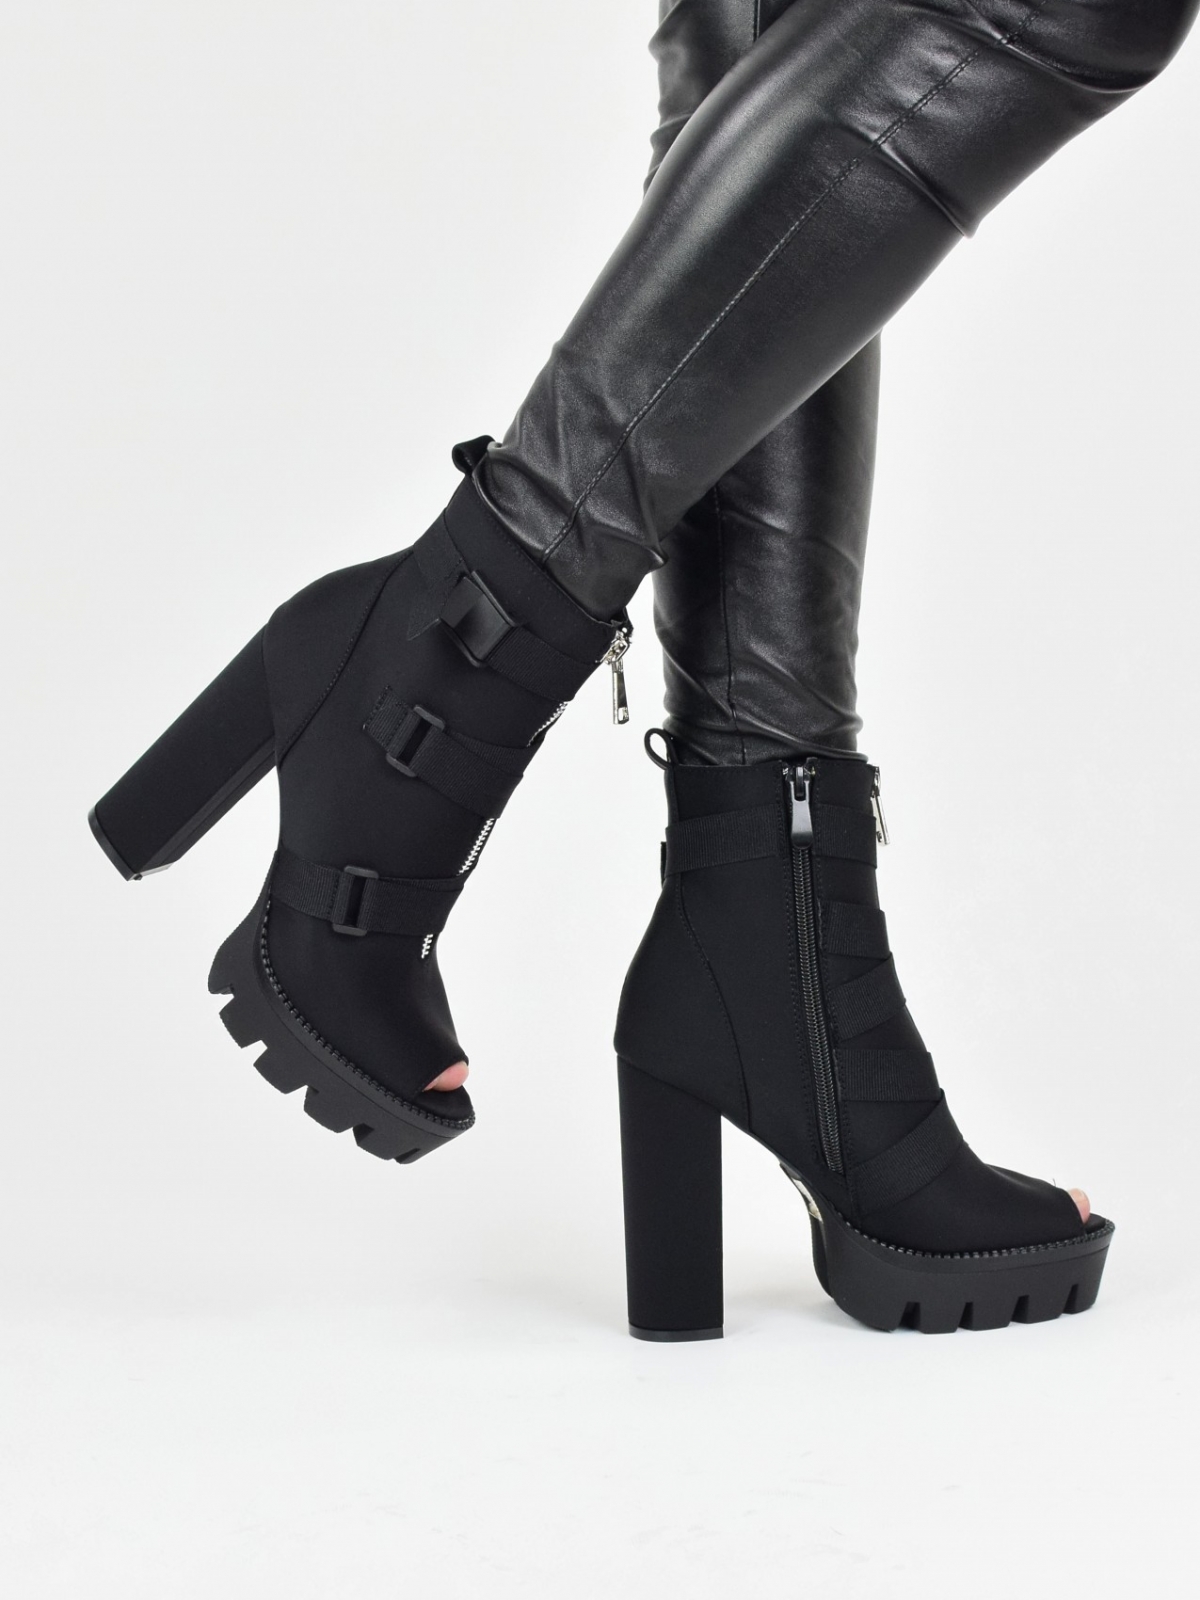 High heeled open toe ankle boots in black